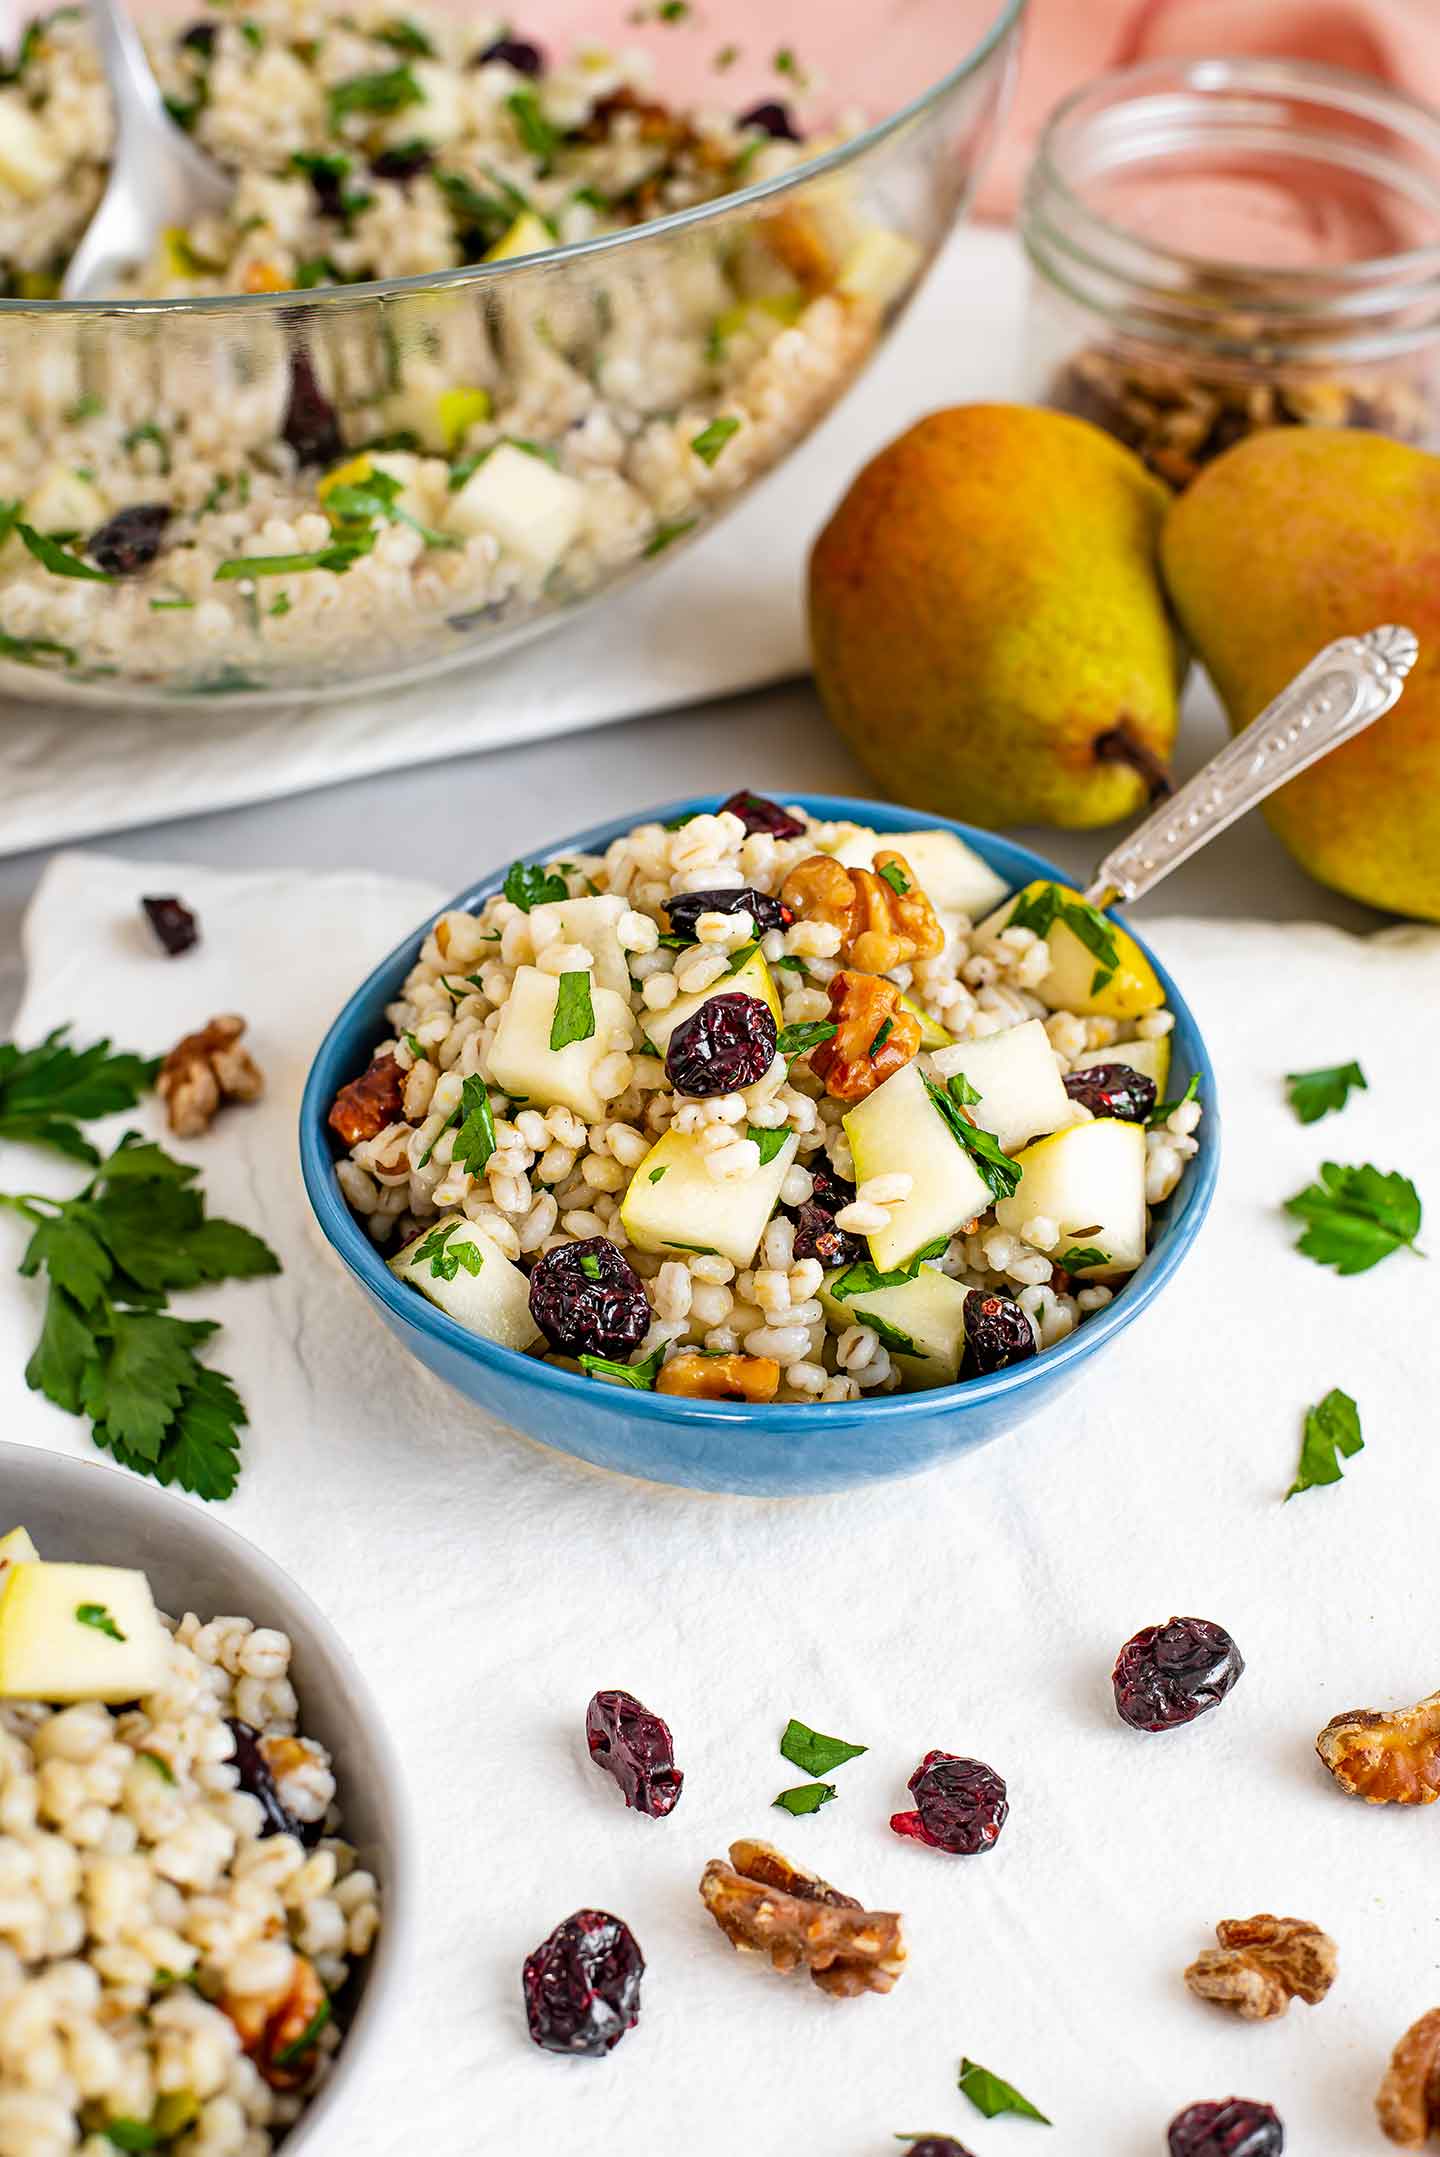 Side view of pear, pearled barley salad in a small salad dish. Diced pear, dried cranberries, toasted walnuts, and fresh parsley are mixed with the fluffy barley. More salad is in a serving bowl and other small salad bowls are filled as well.